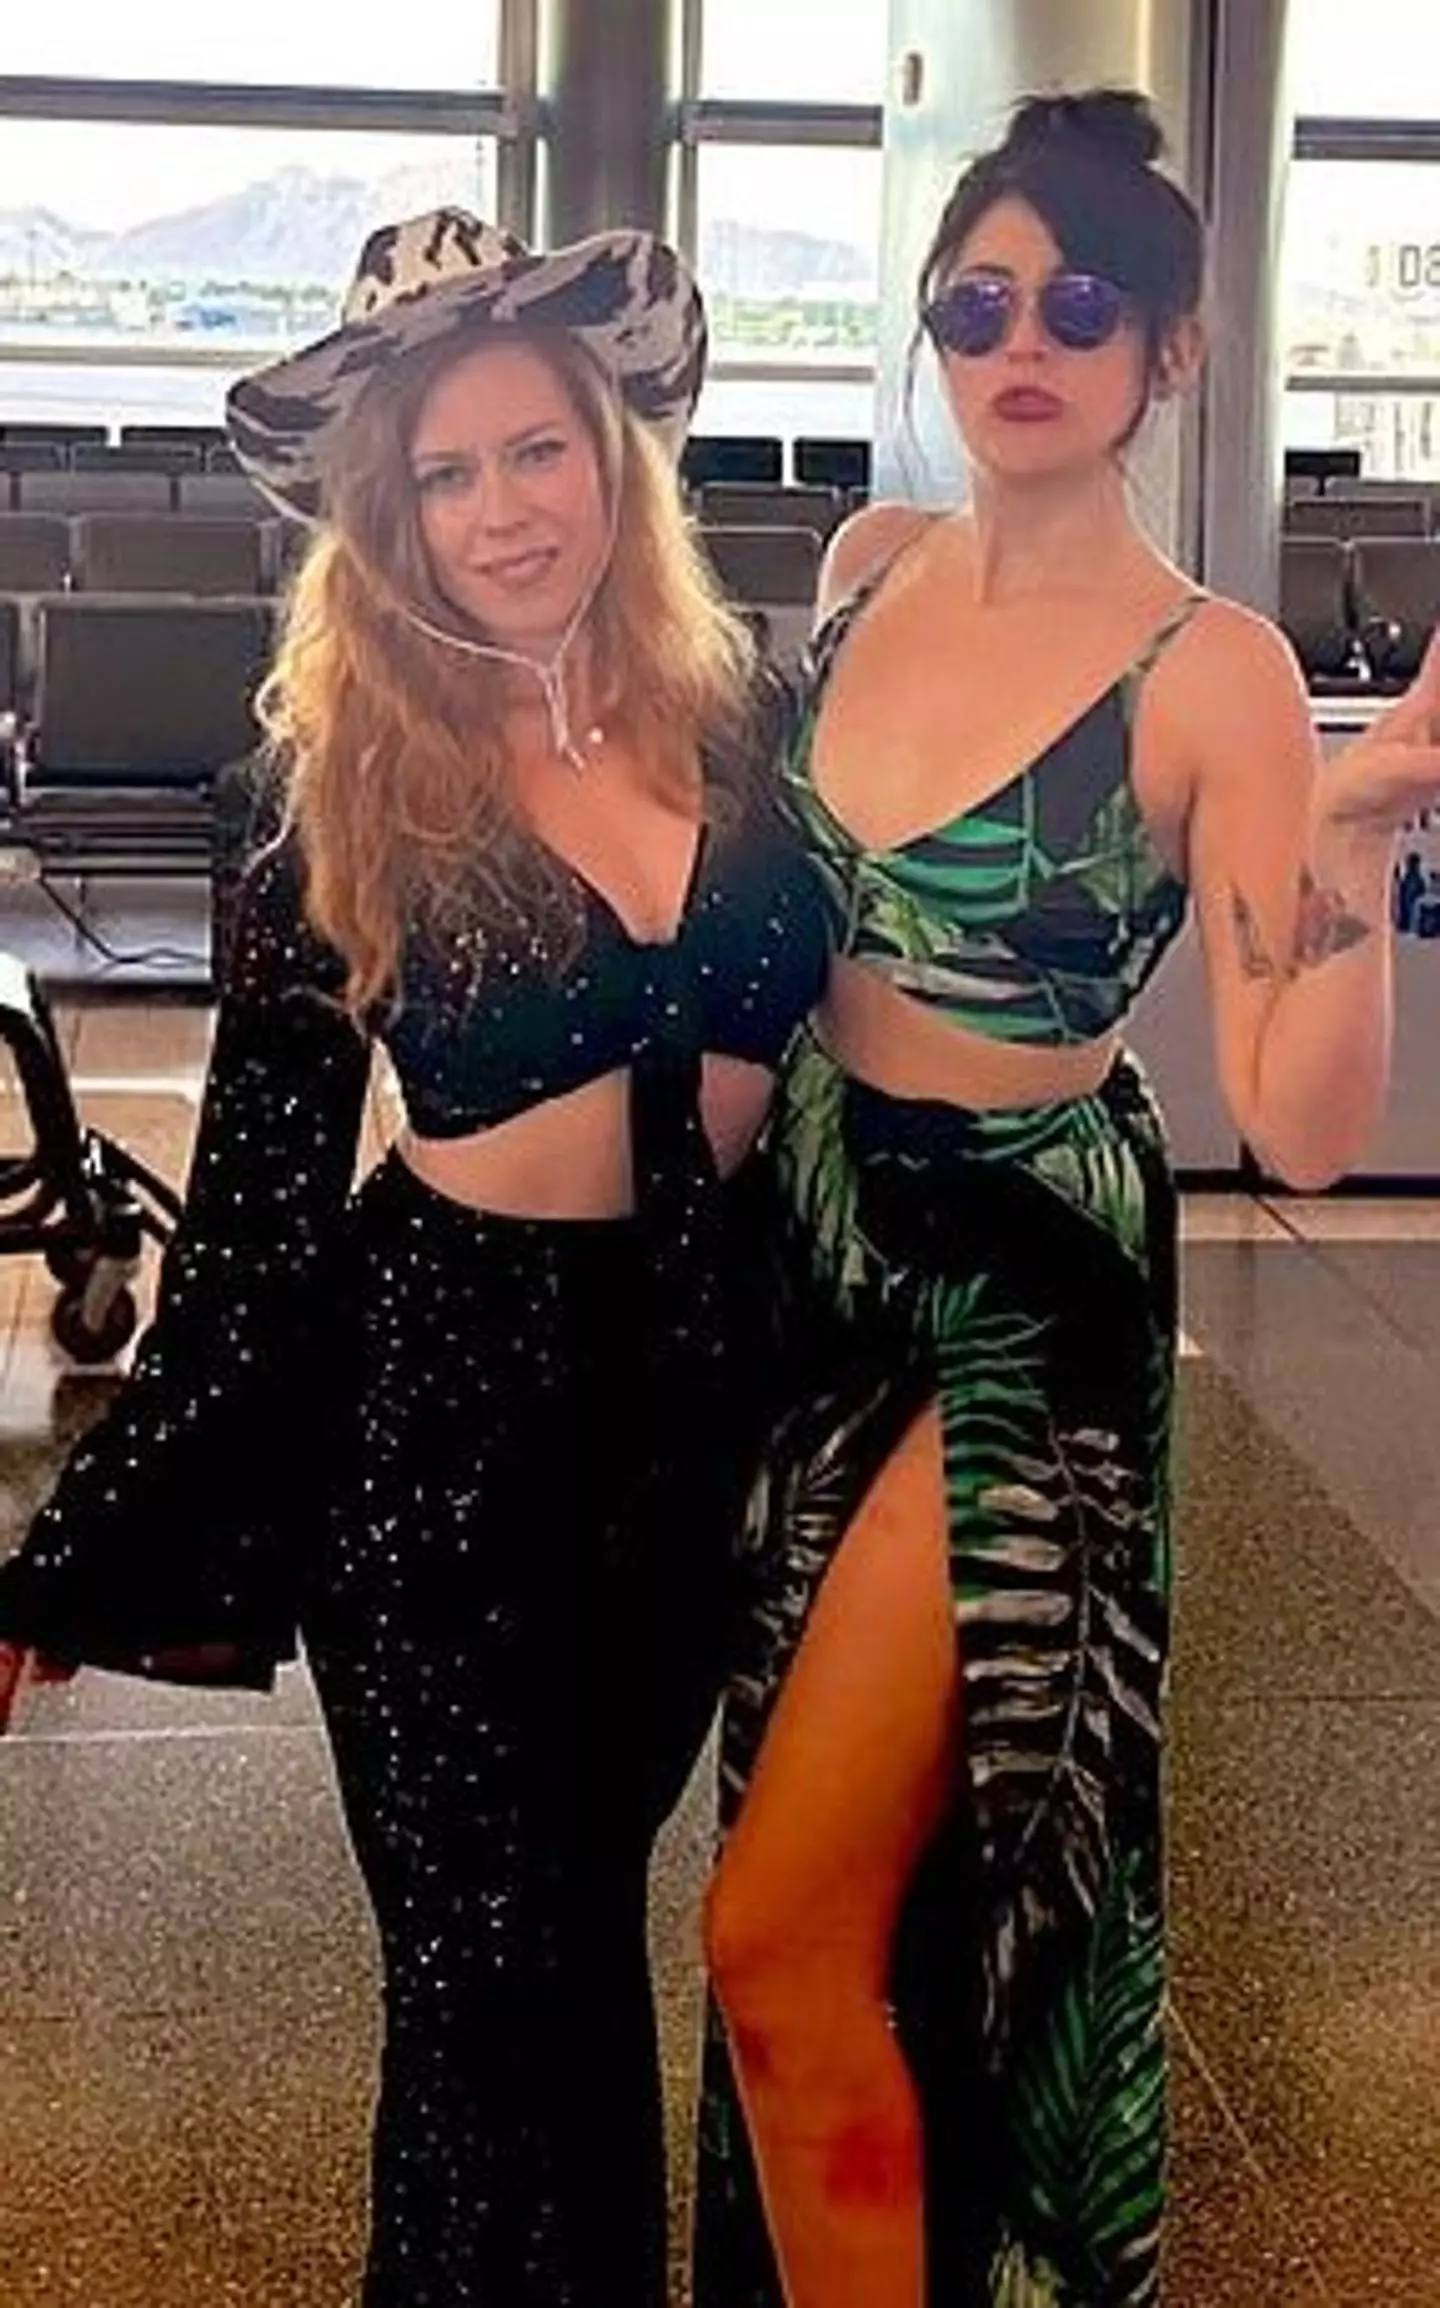 The two travellers said they were 'forced' to change out of their outfits by airport staff.